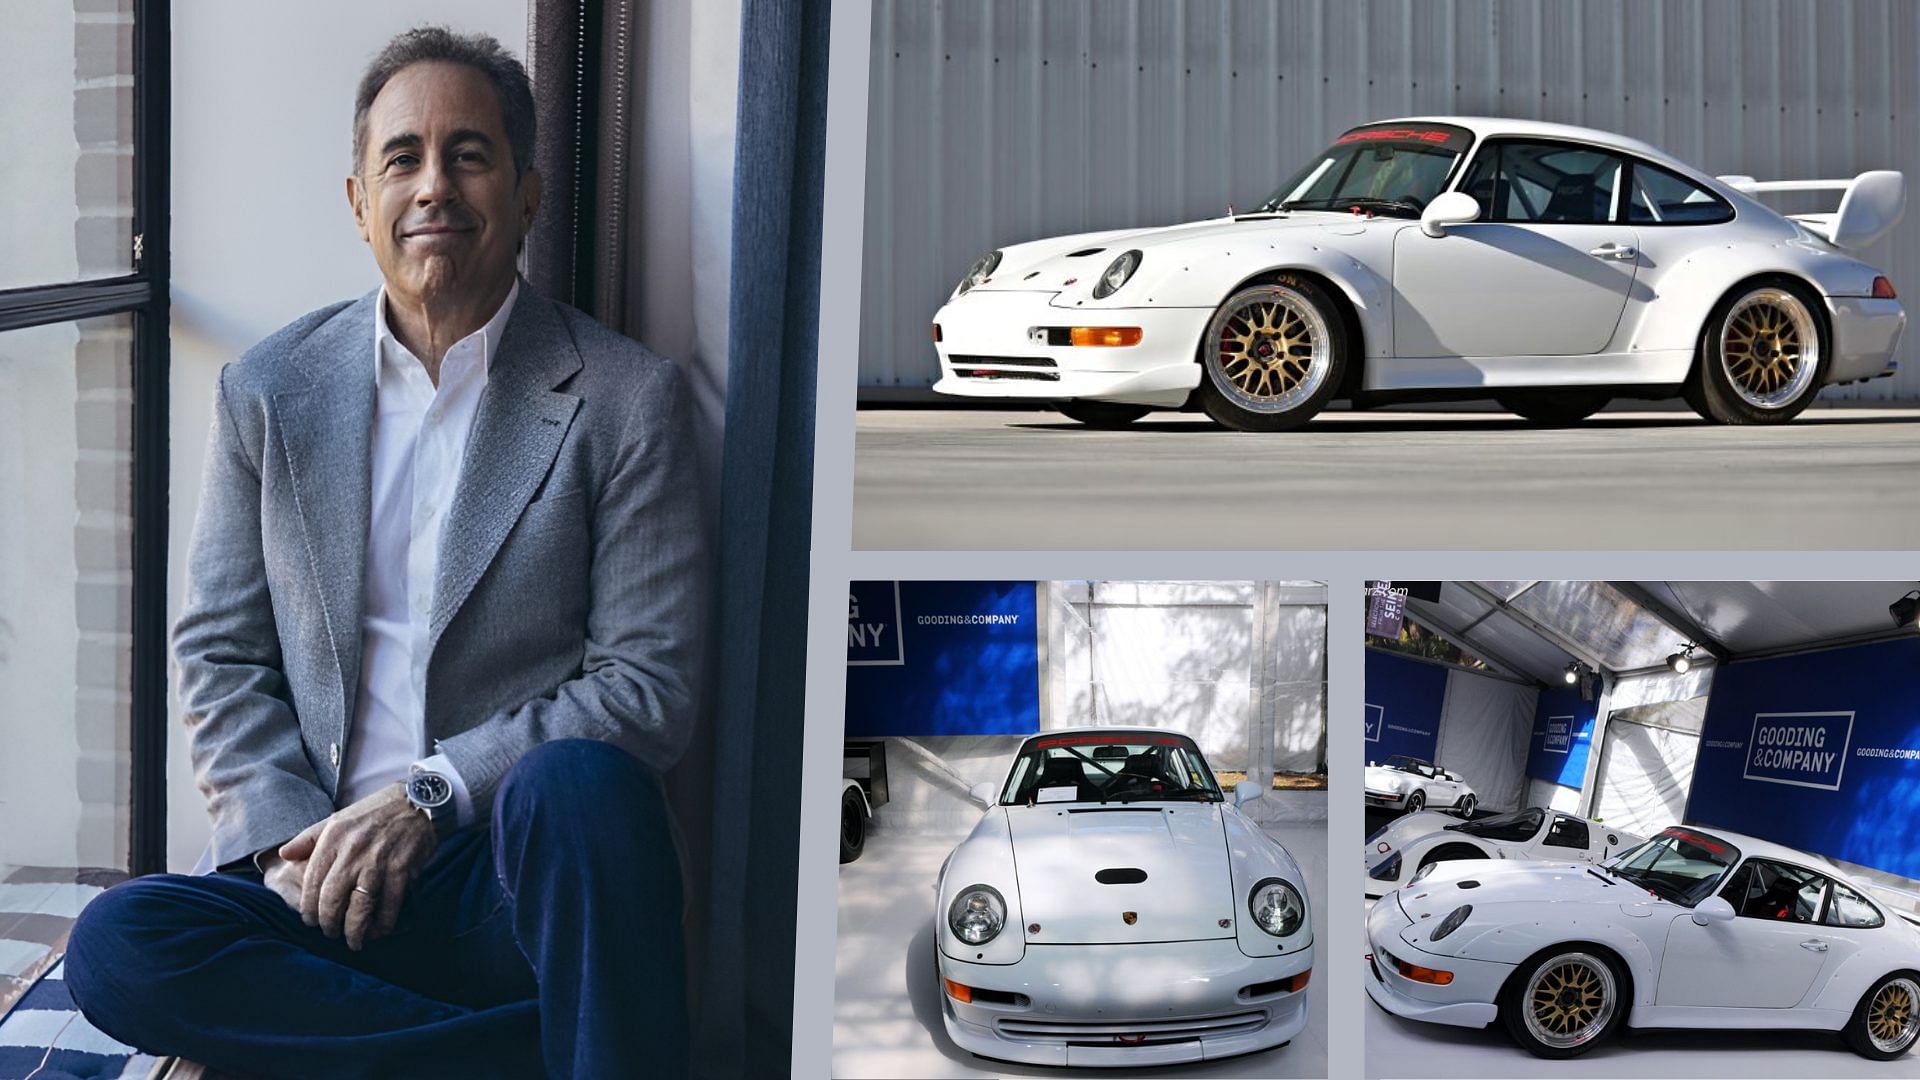 Jerry Seinfeld and his 1997 Porsche 993 Cup 3.8 RSR